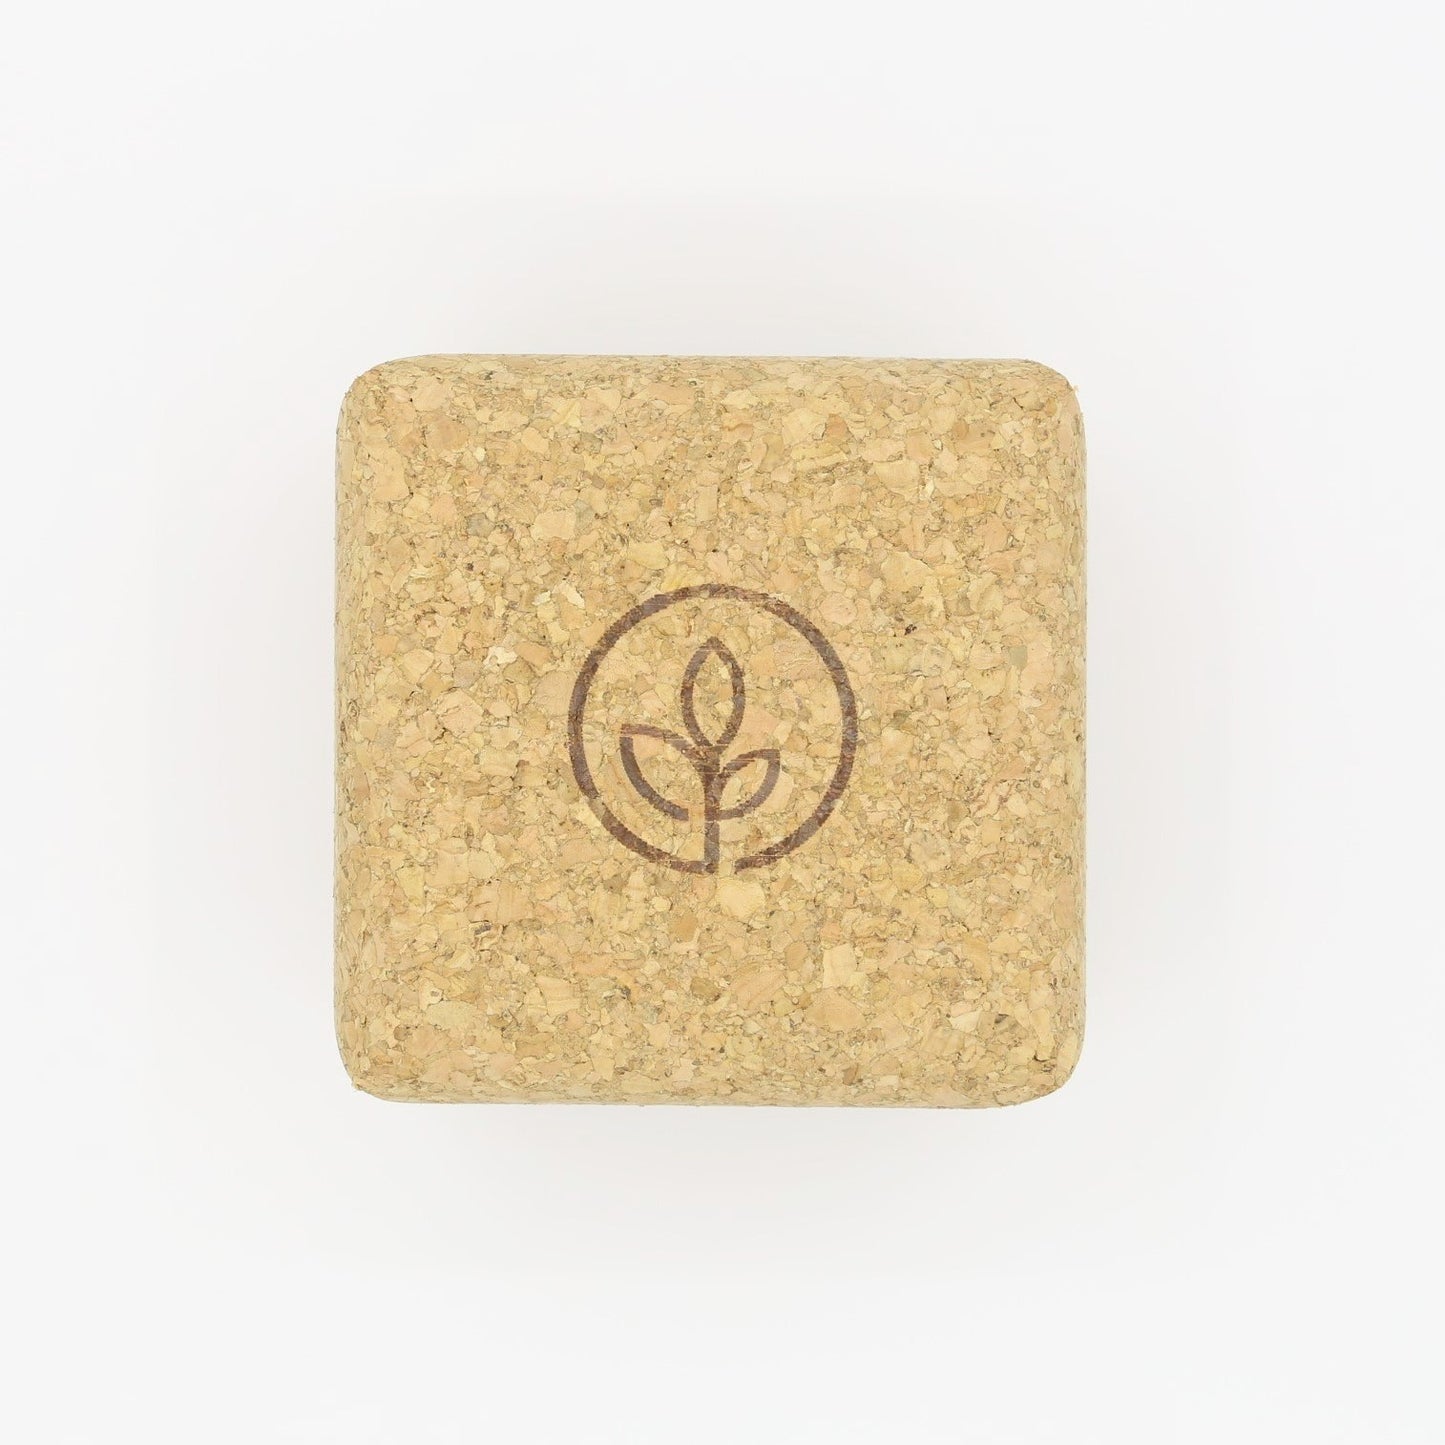 shampoo bar travel box made of cork closed in square shape from the top